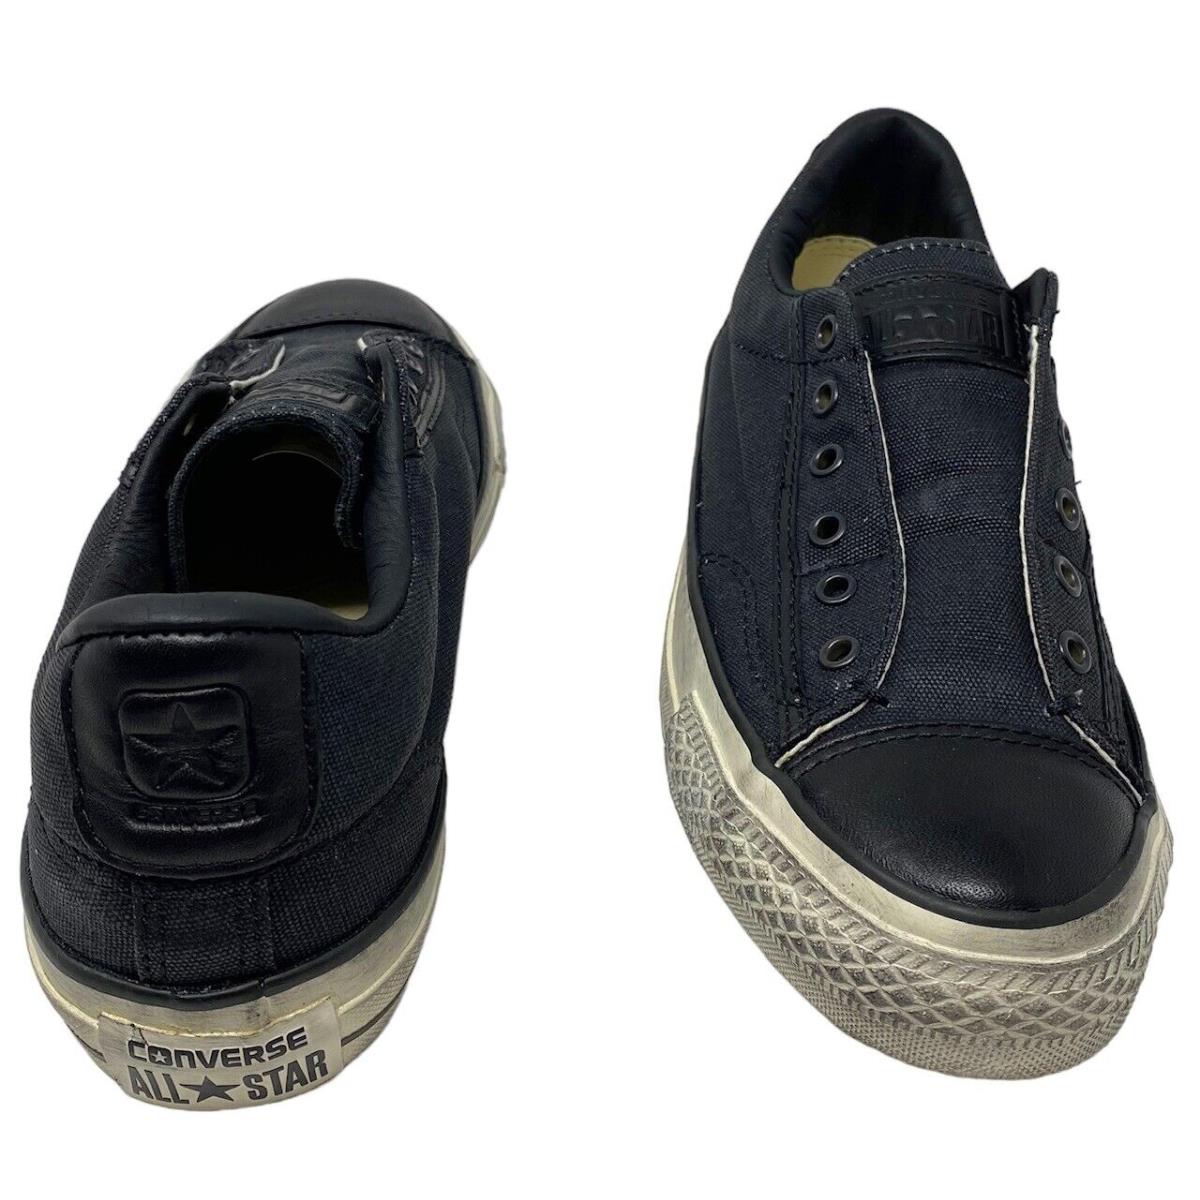 Converse Chuck Taylor X John Varvatos Laceless Slip-on Shoes in Burnished Black